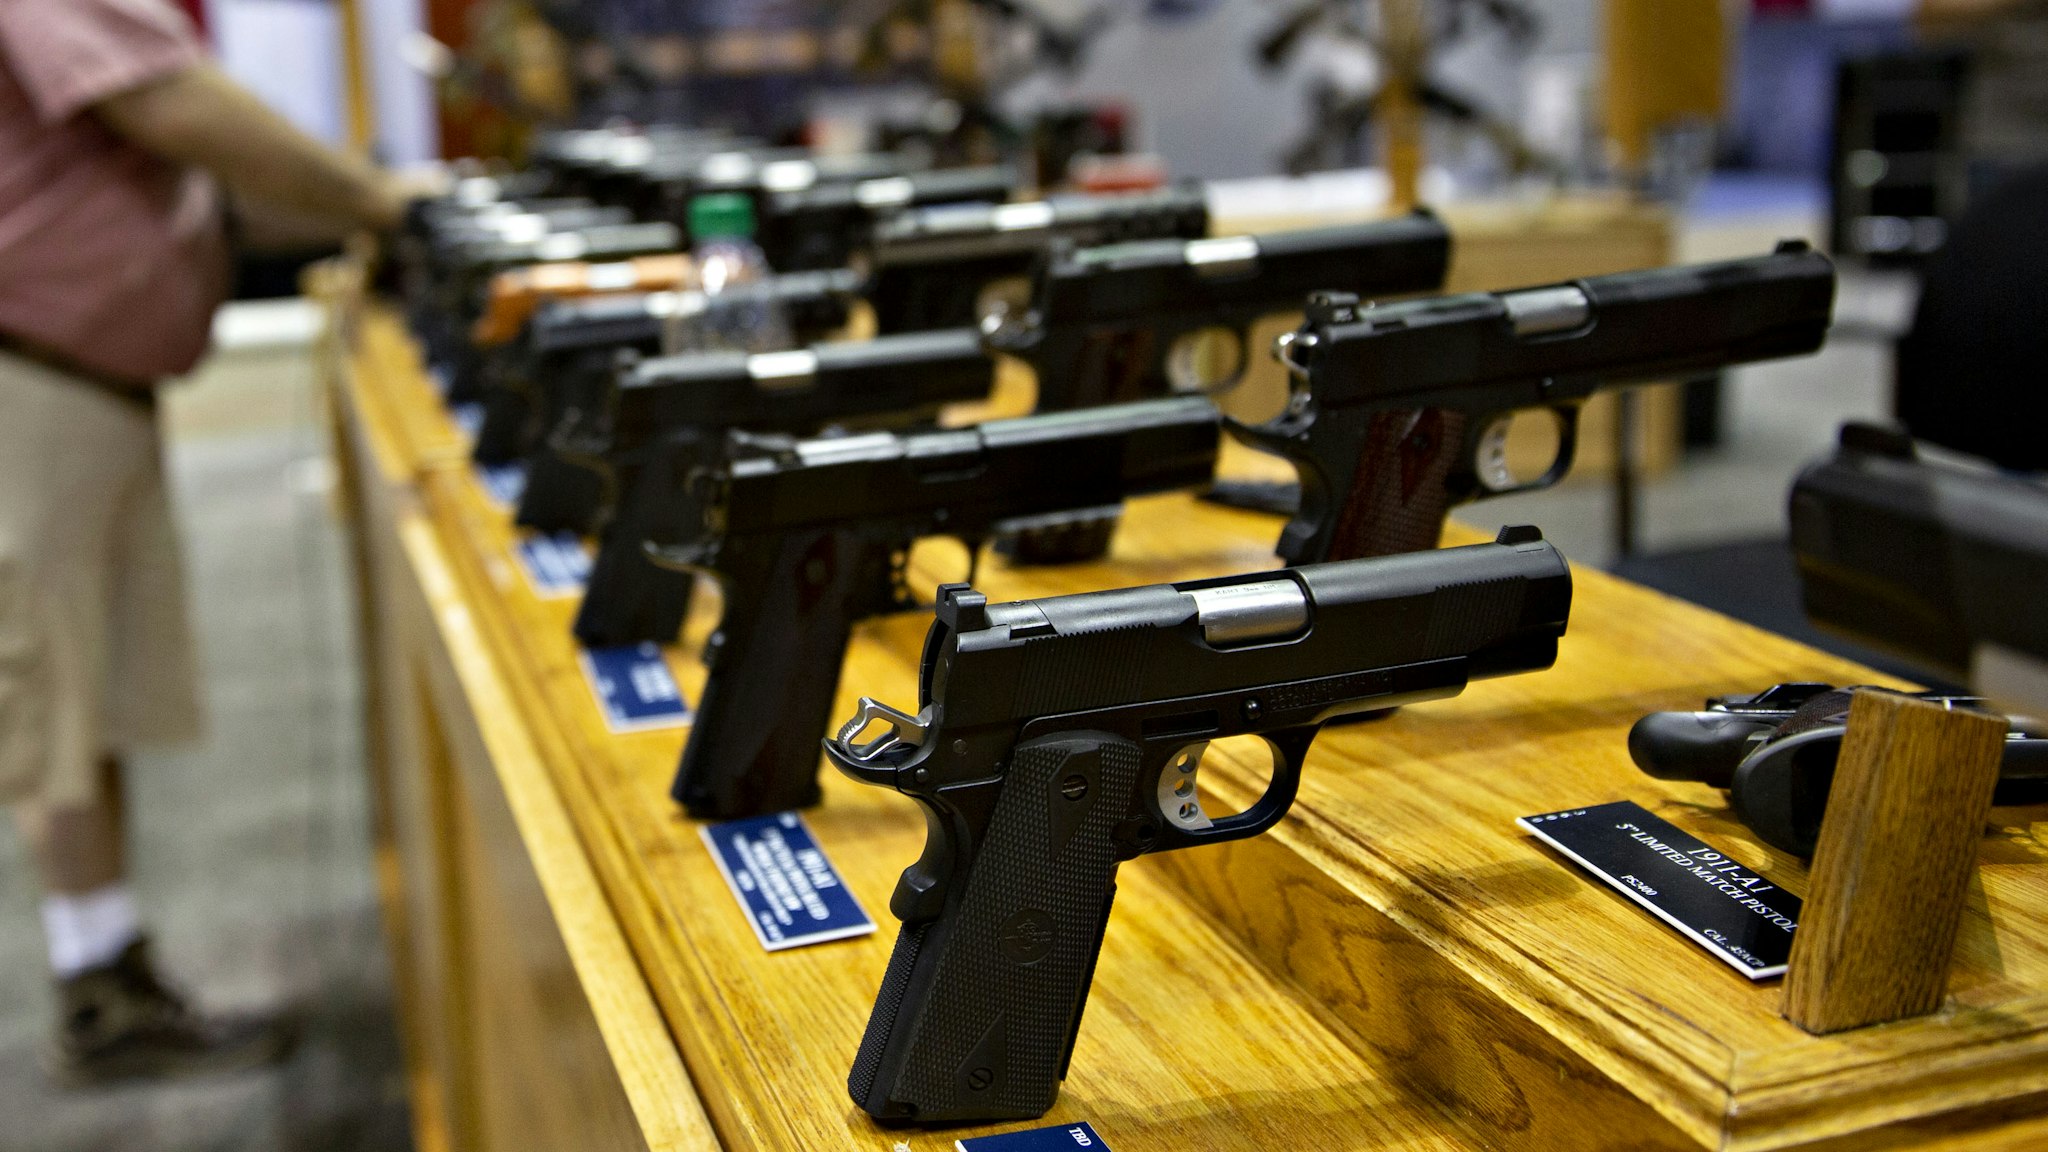 A worker sets up a display of handguns on the floor of the exhibition hall ahead of the National Rifle Association (NRA) annual meeting at the Indiana Convention Center in Indianapolis, Indiana, U.S., on Thursday, April 25, 2019. President Donald Trump will speak at the NRA Institute for Legislative Action (NRA-ILA) Leadership Forum on Friday.